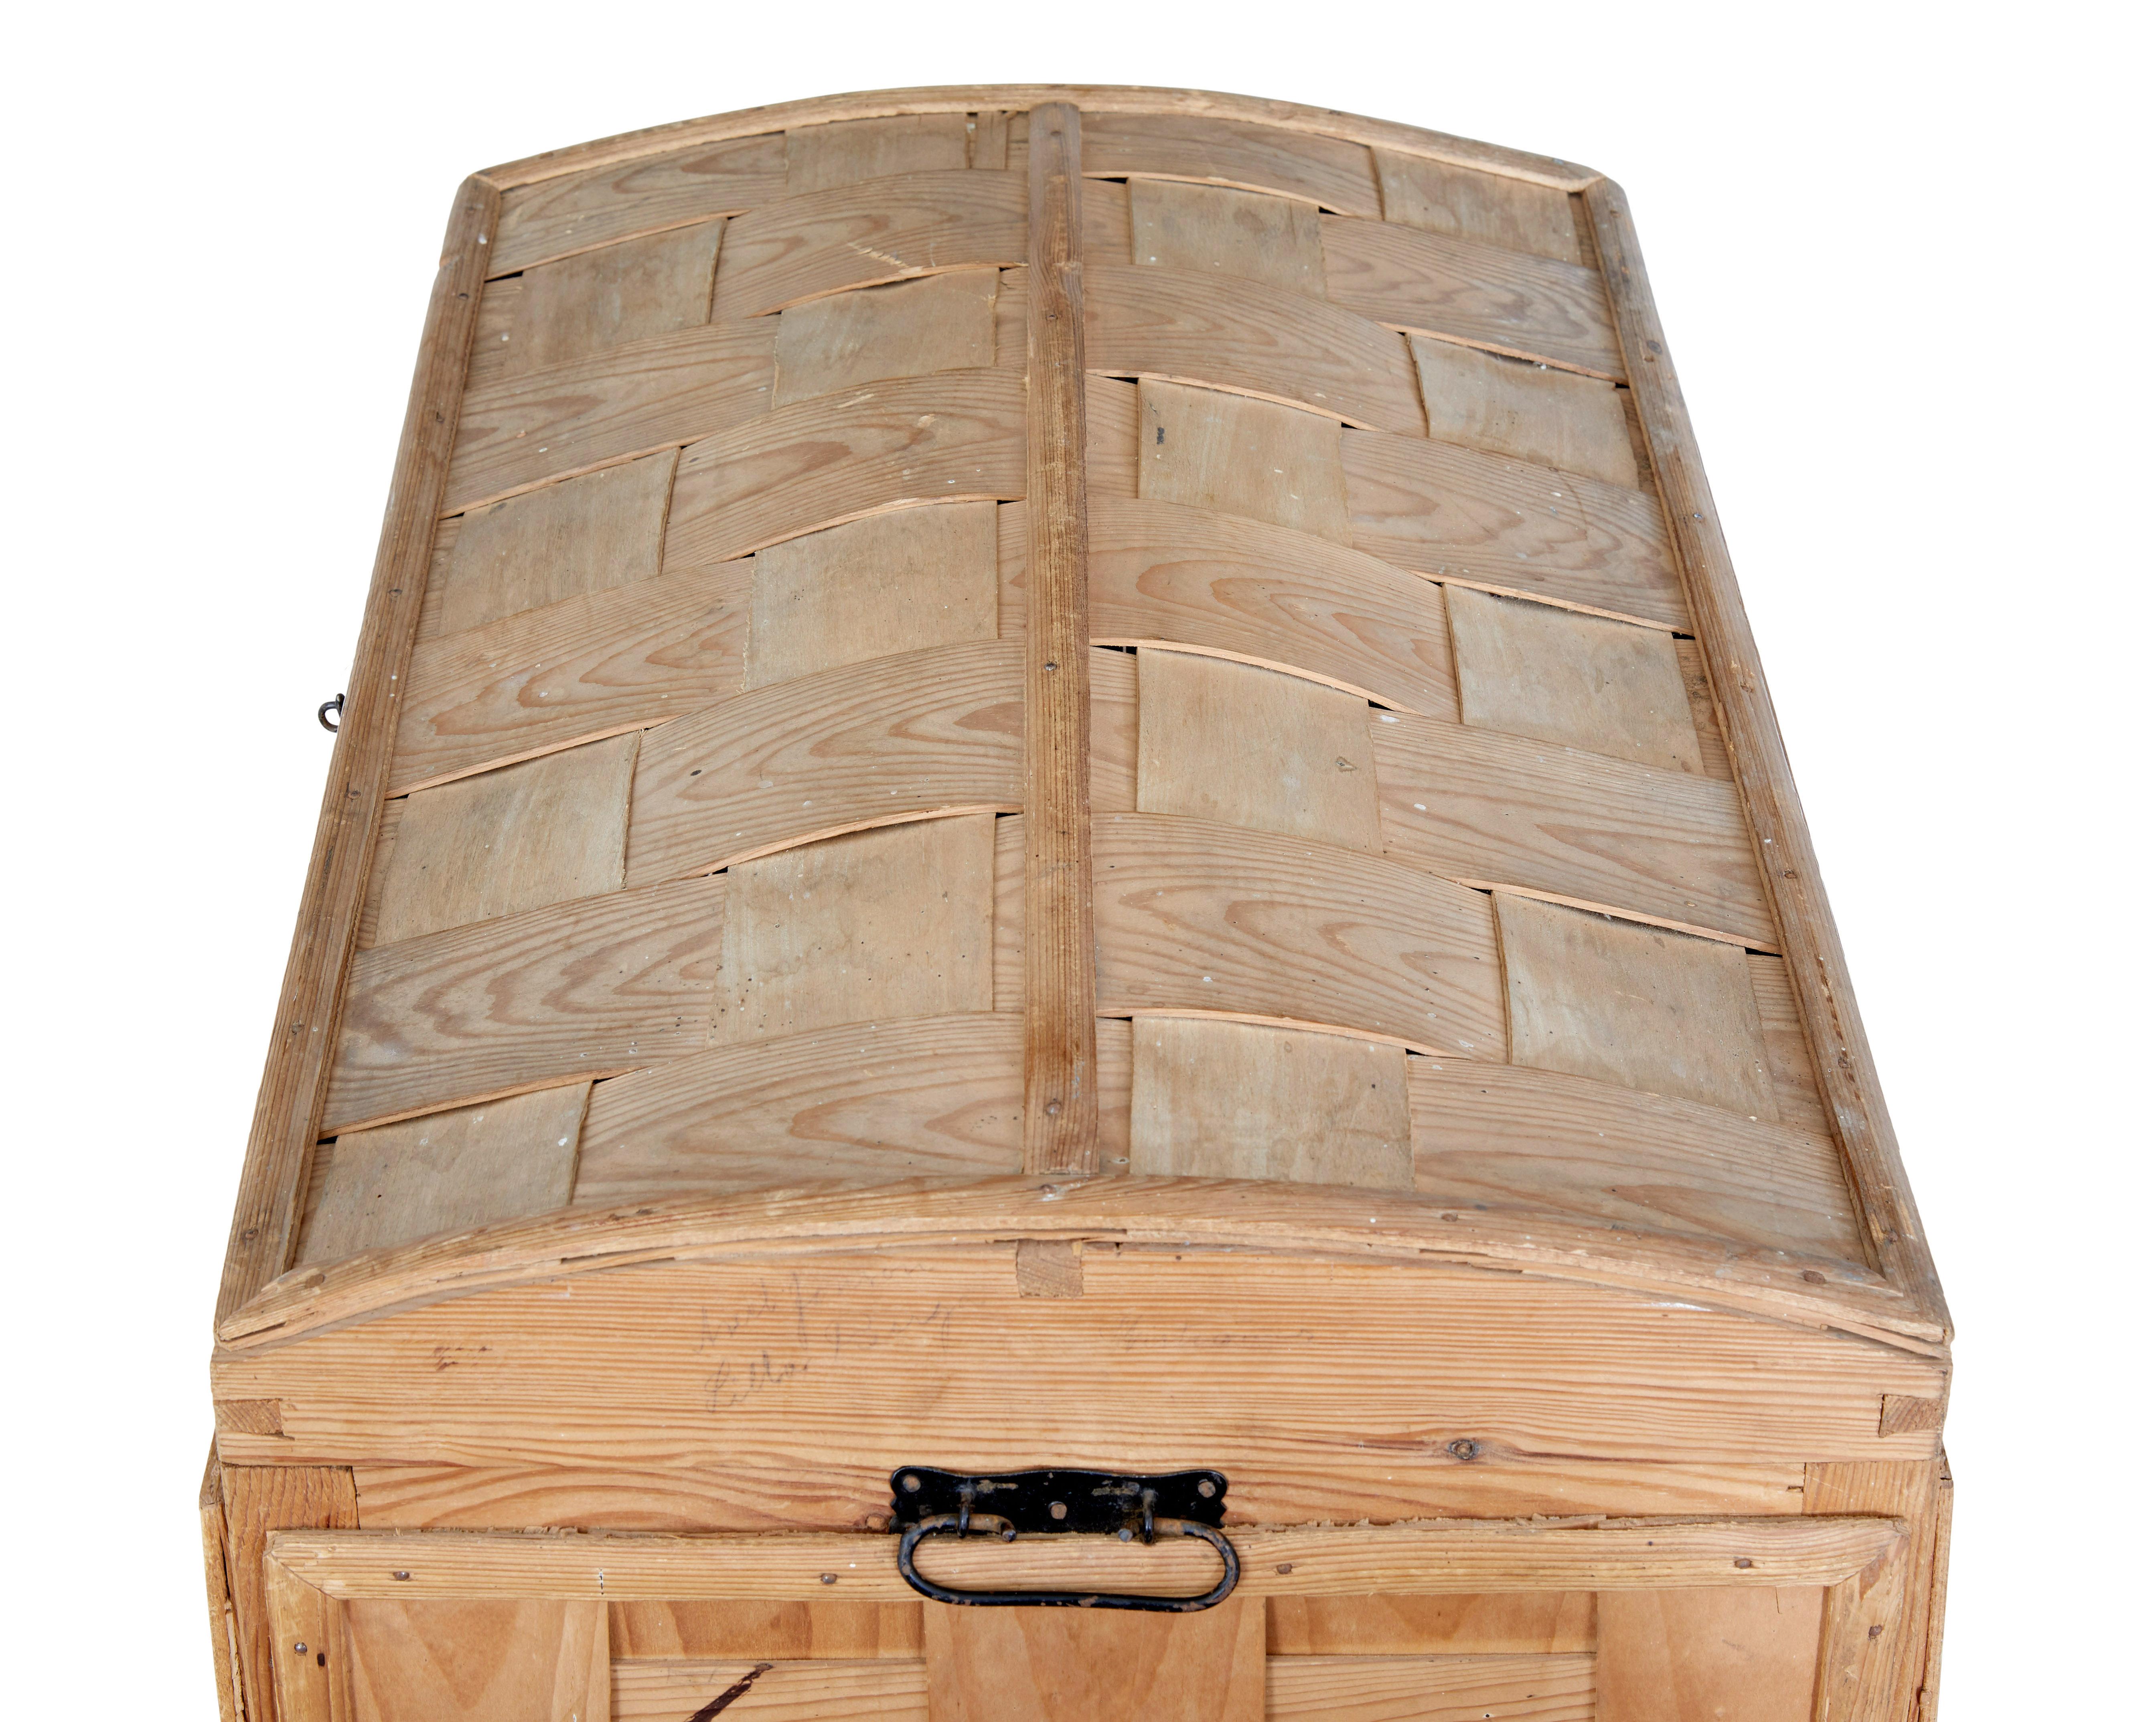 Scandinavian early 20th century woven pine dome top trunk circa 1920.

Fine piece of traditional swedish woodwork, using the minimal amount of wood without compromising on structural strength.

Made from using thin planks of pine woven into a  solid